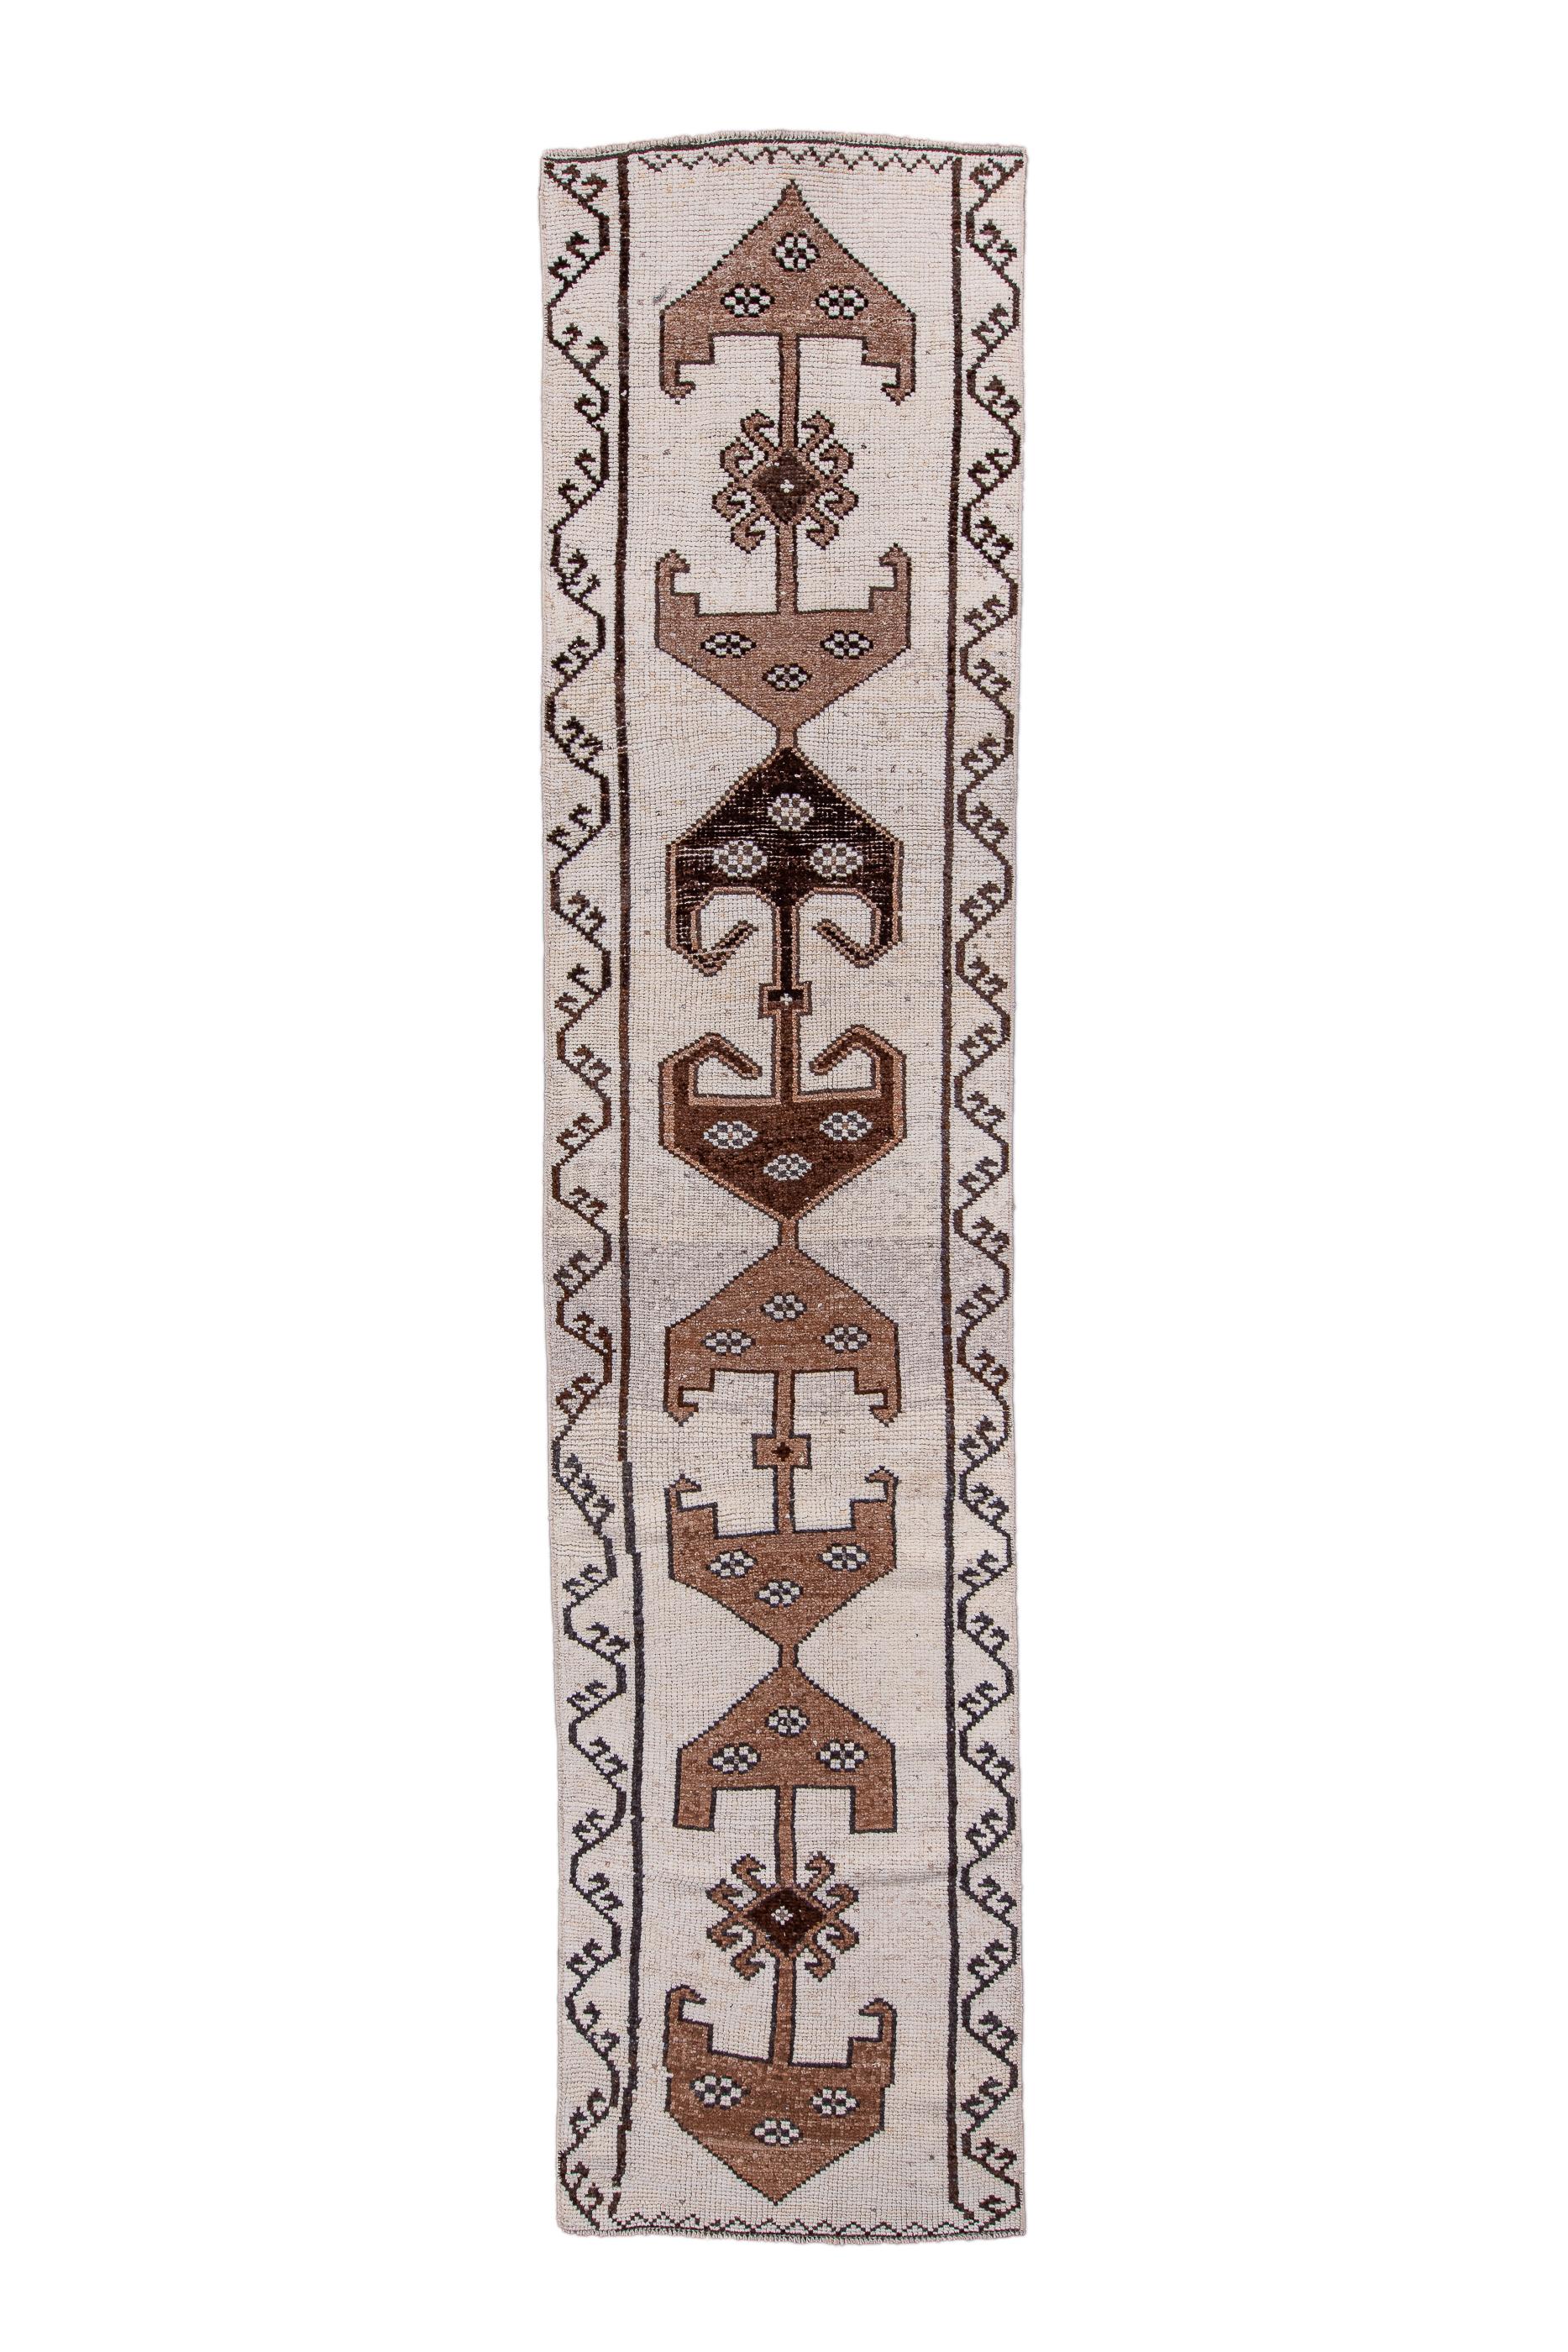 This west Anatolian village kenare (runner) show the currently popular ecru field with a floating pole medallion of red and brown anchor motives, with two smaller hooked diamonds. Ecru main border with lateral, hooked meander, and narrow zig-zags